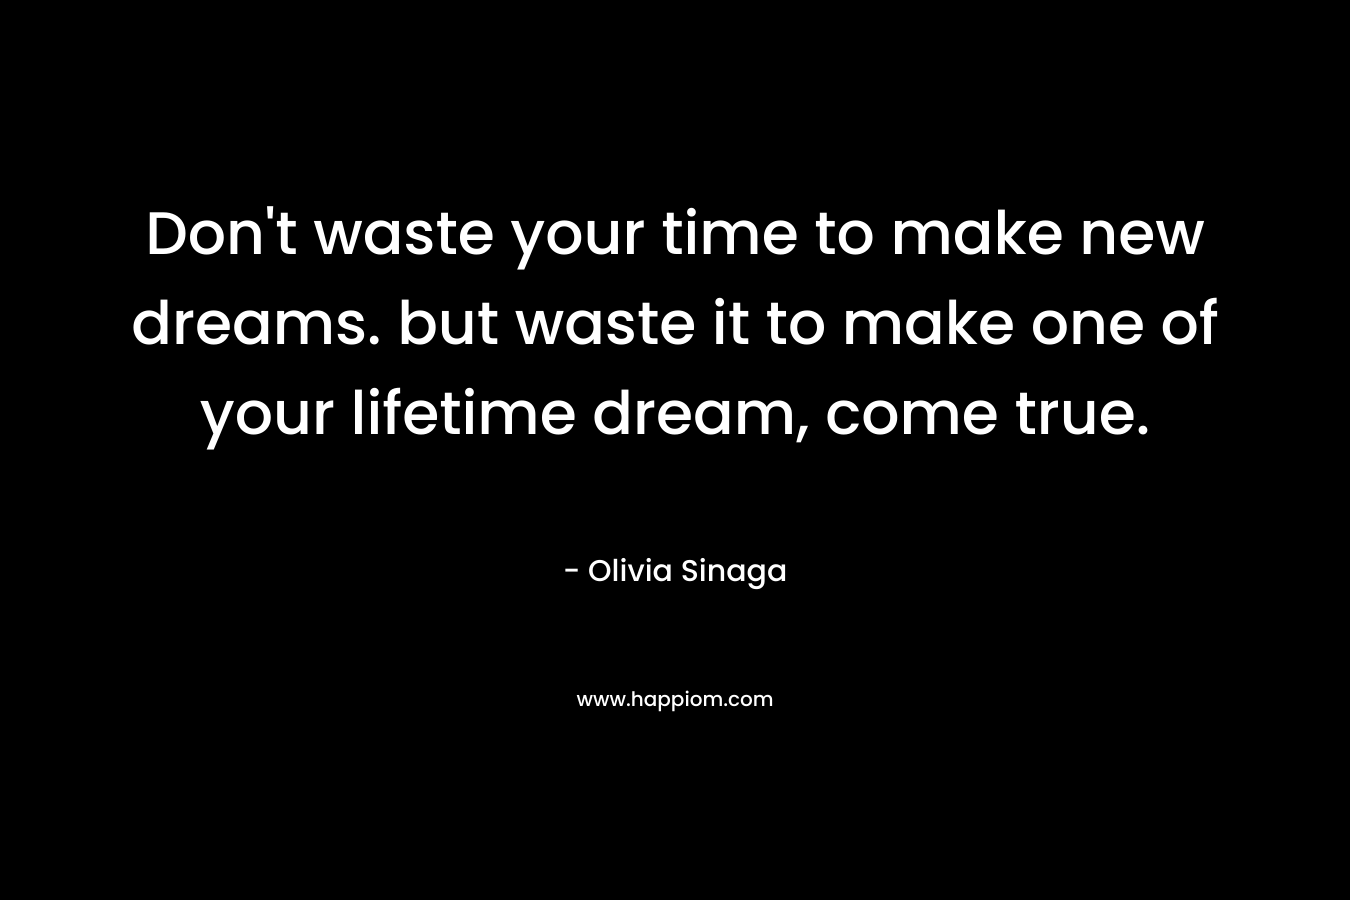 Don't waste your time to make new dreams. but waste it to make one of your lifetime dream, come true.